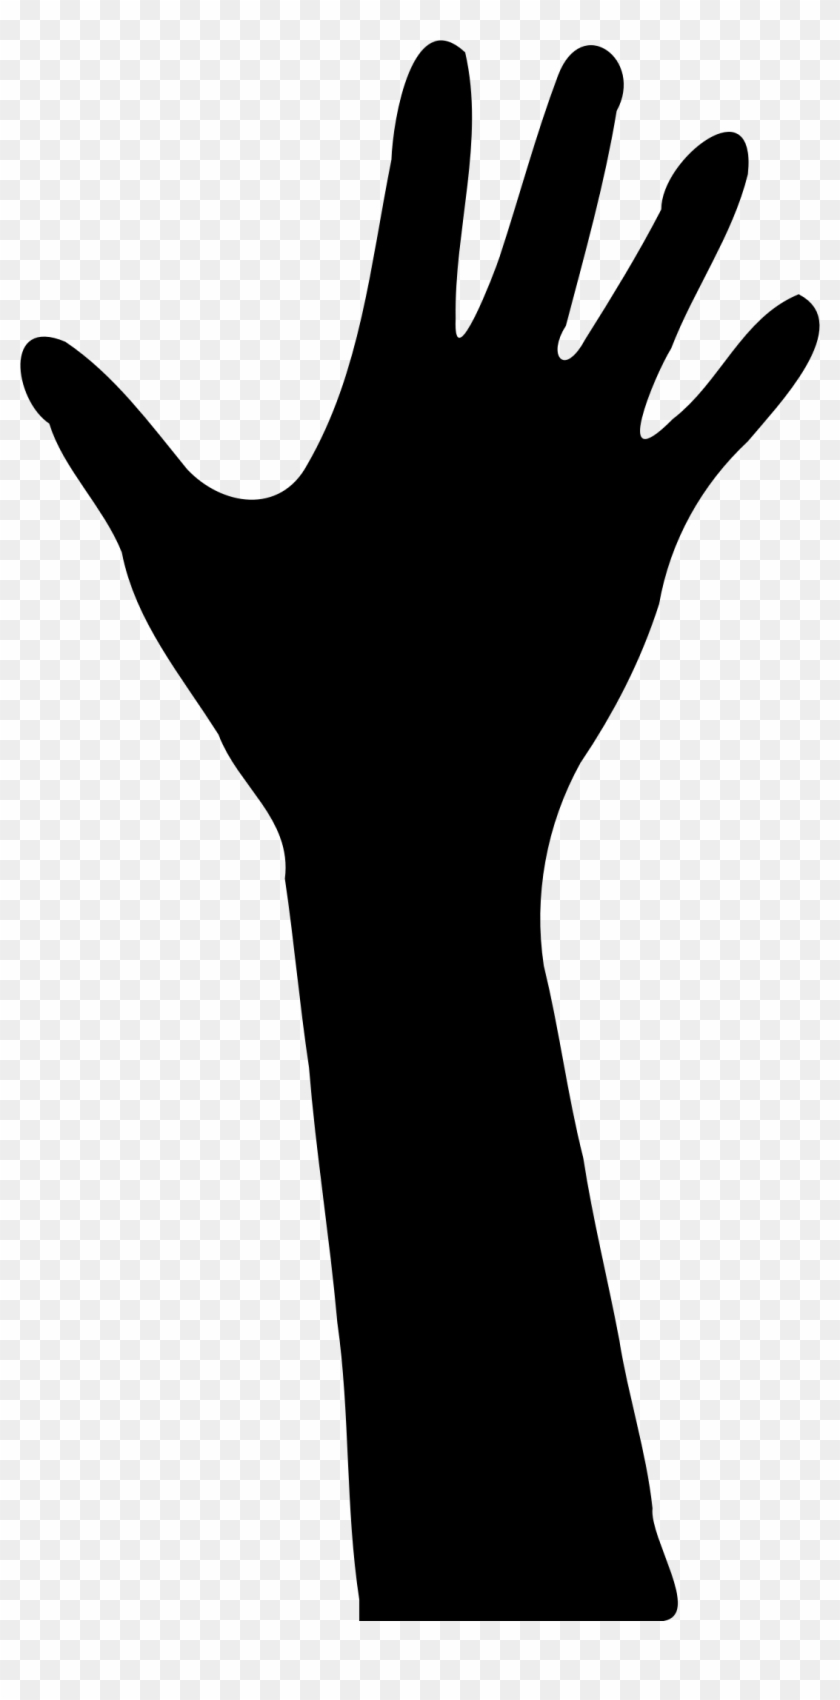 Clipart Silhouette Hands Reaching Hand Reaching Out - Hand Reaching Out Clipart #184761